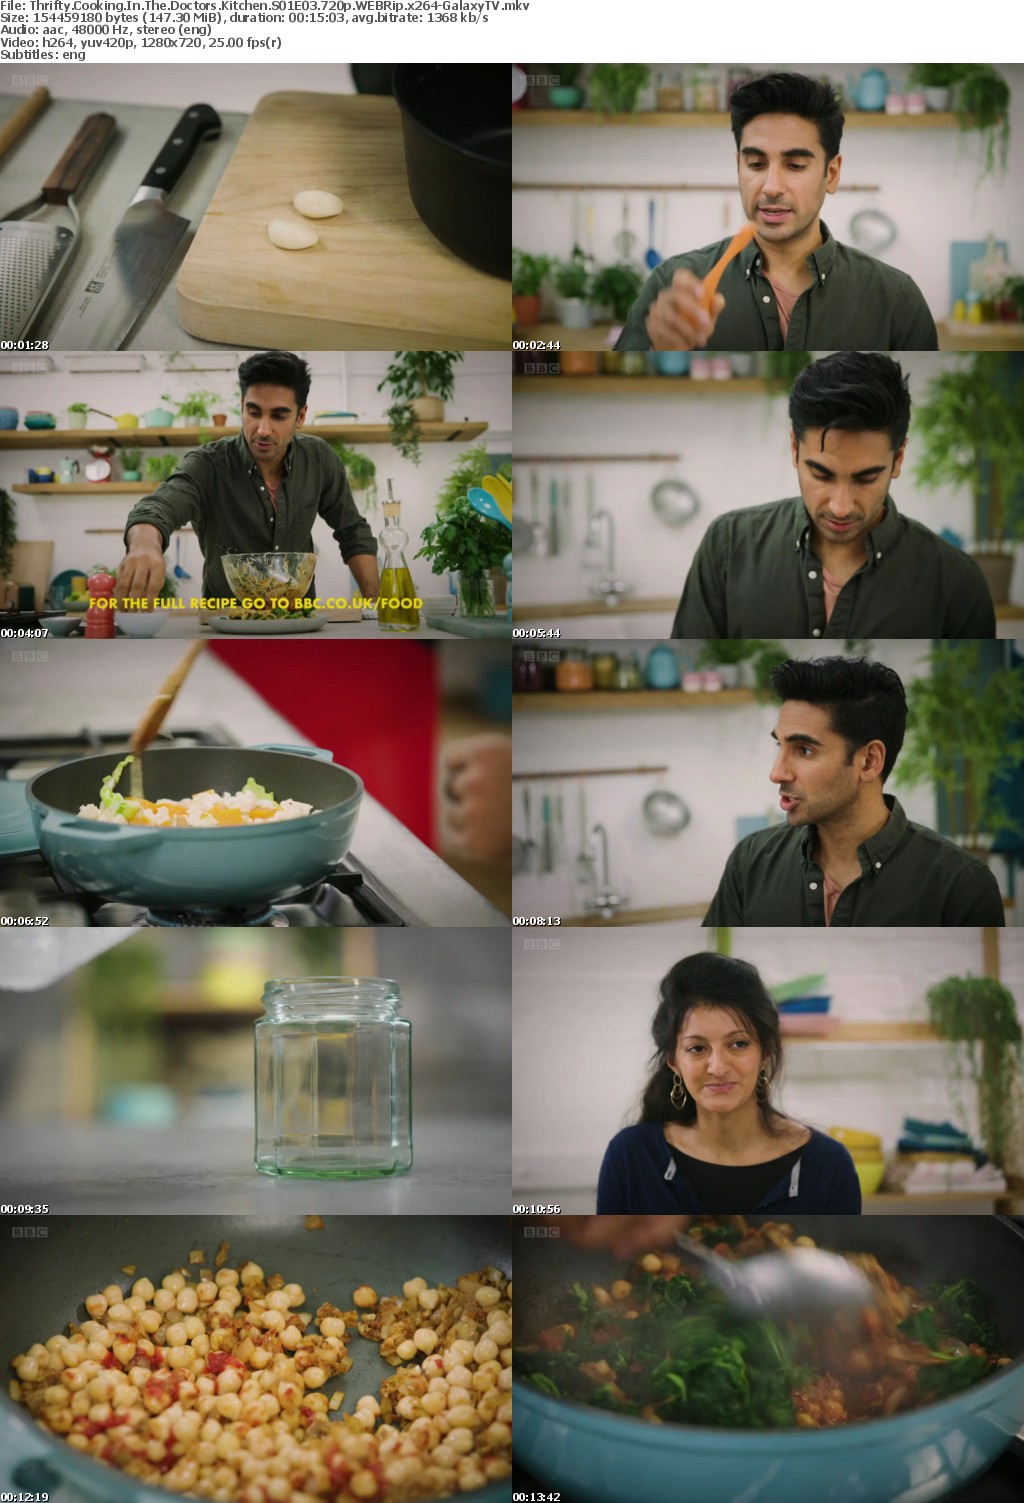 Thrifty Cooking In The Doctors Kitchen S01 COMPLETE 720p WEBRip x264-GalaxyTV